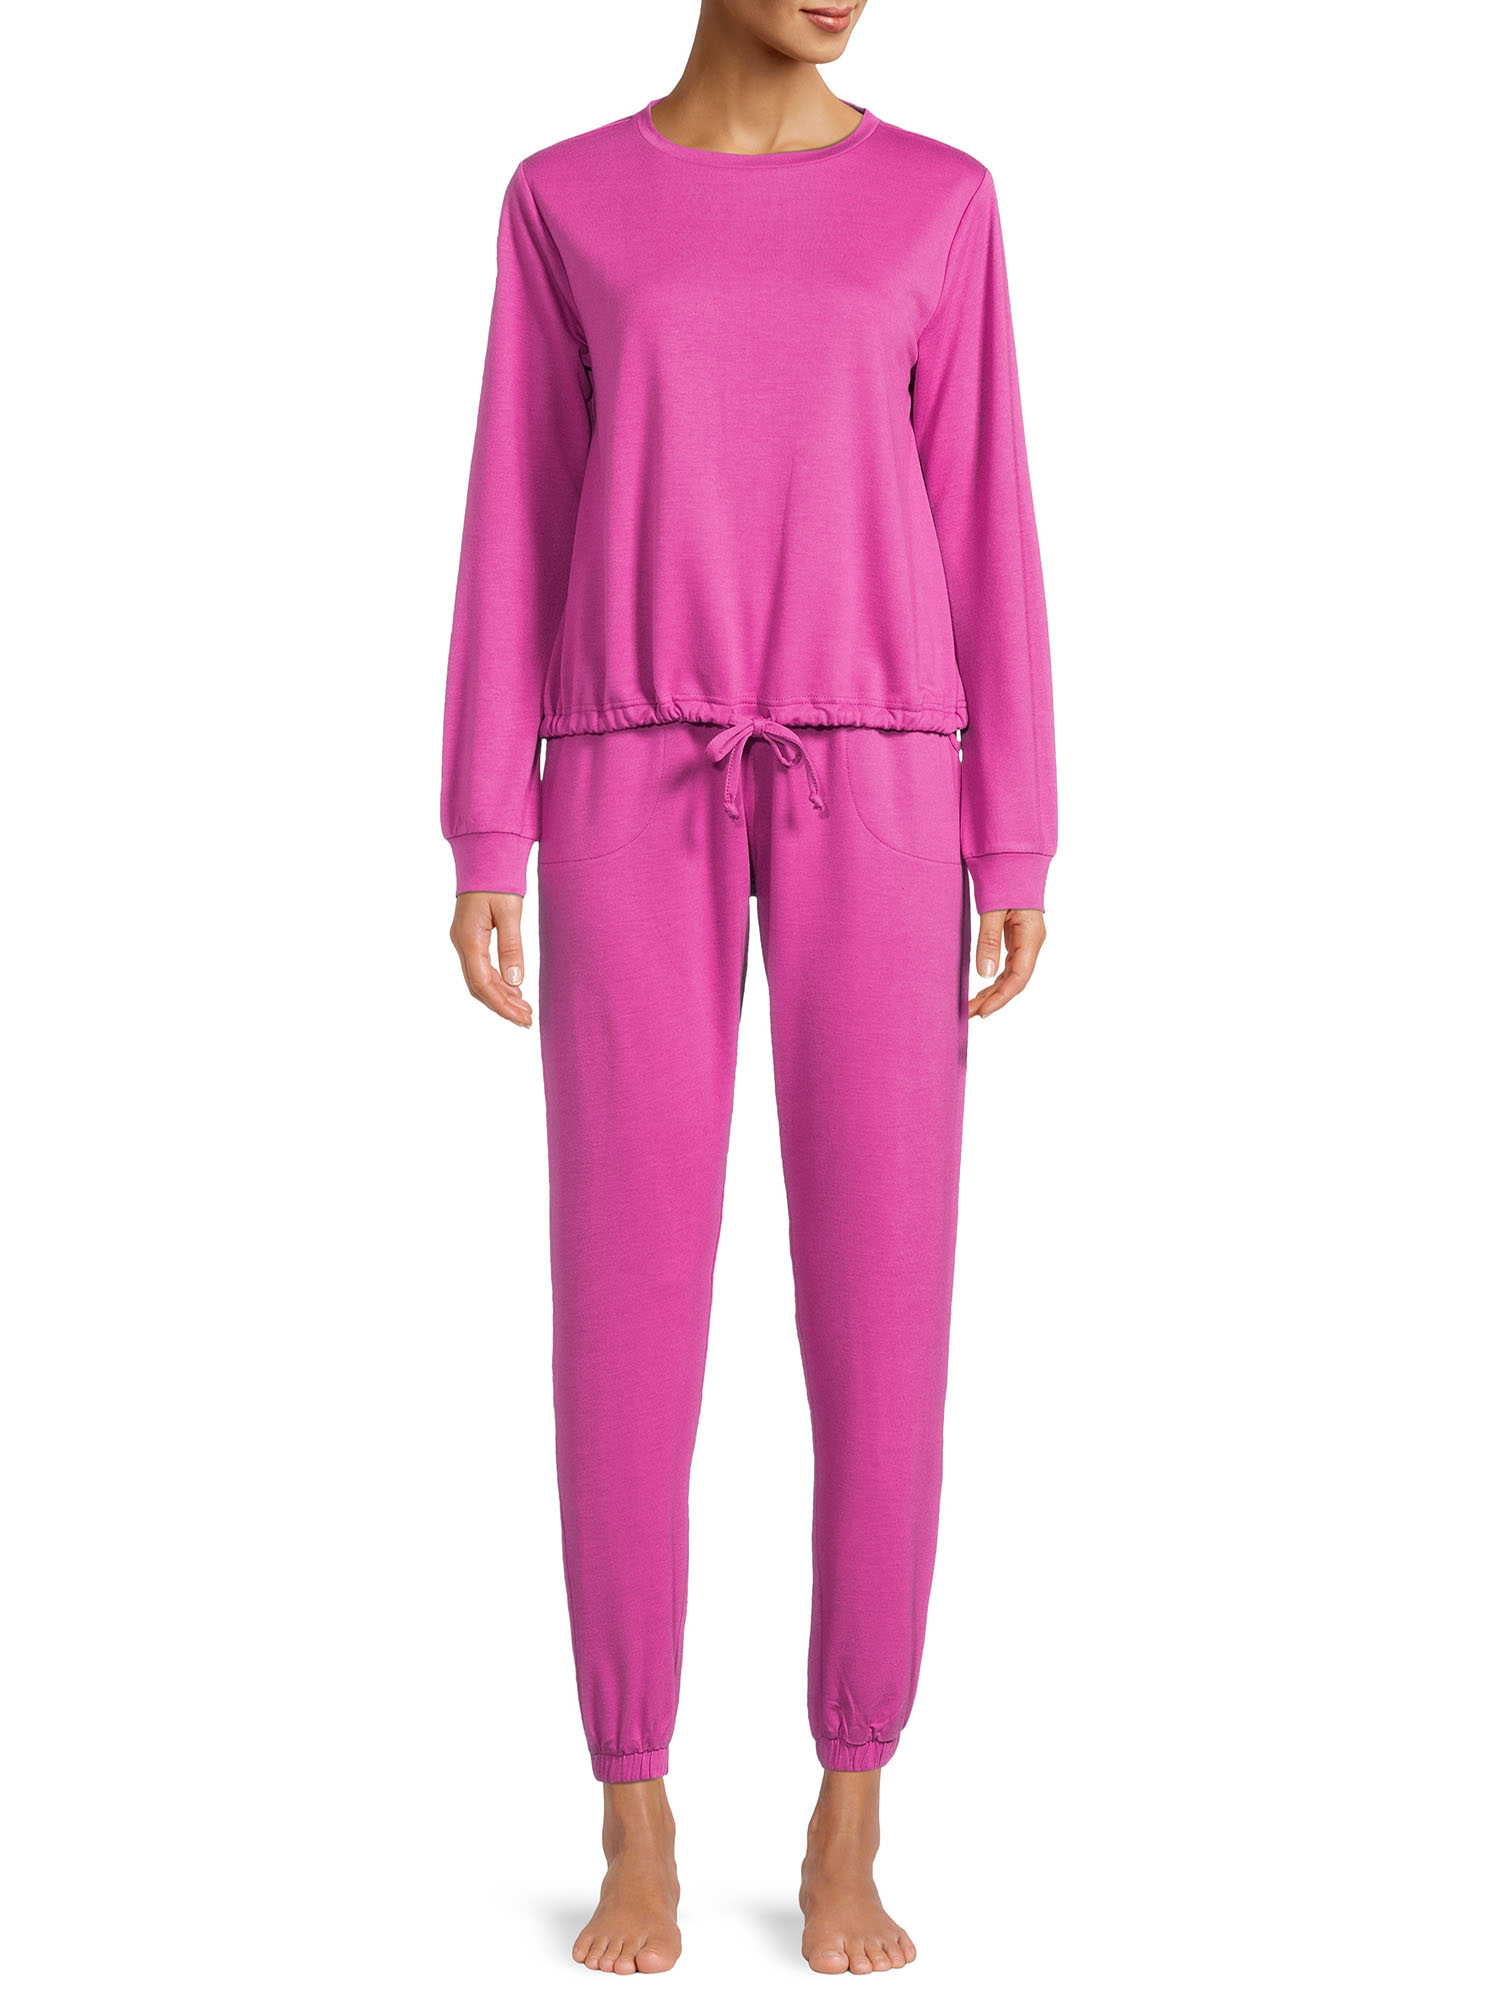 Lissome Women's and Women's Plus L/S French Terry 2-Piece PJ Set - image 2 of 6